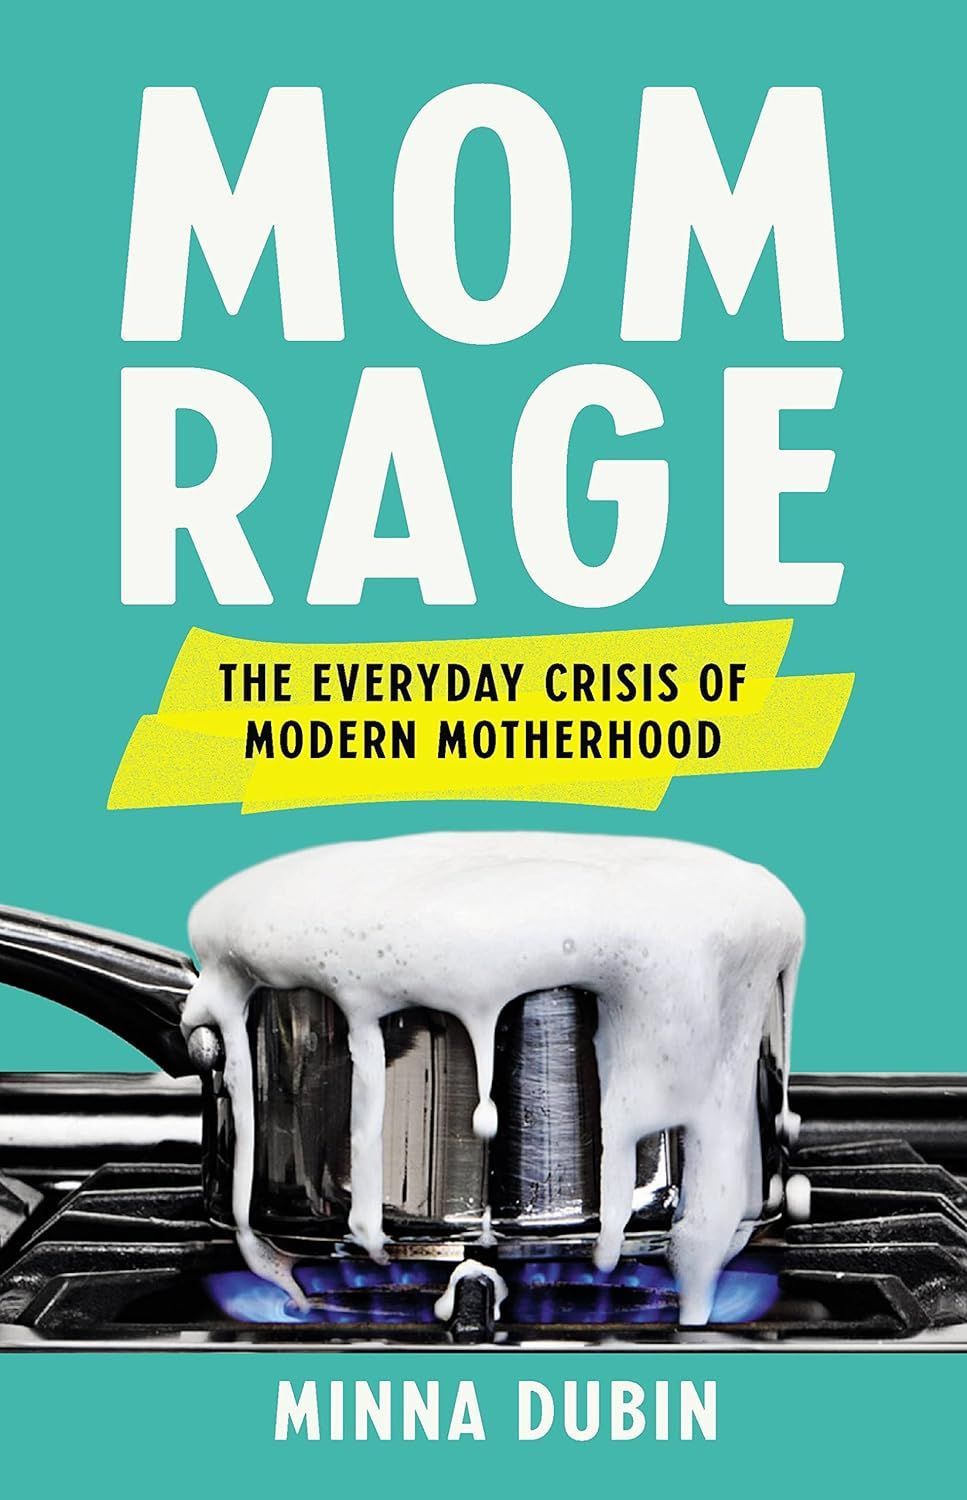 Using Our Words: On Minna Dubin’s “Mom Rage”